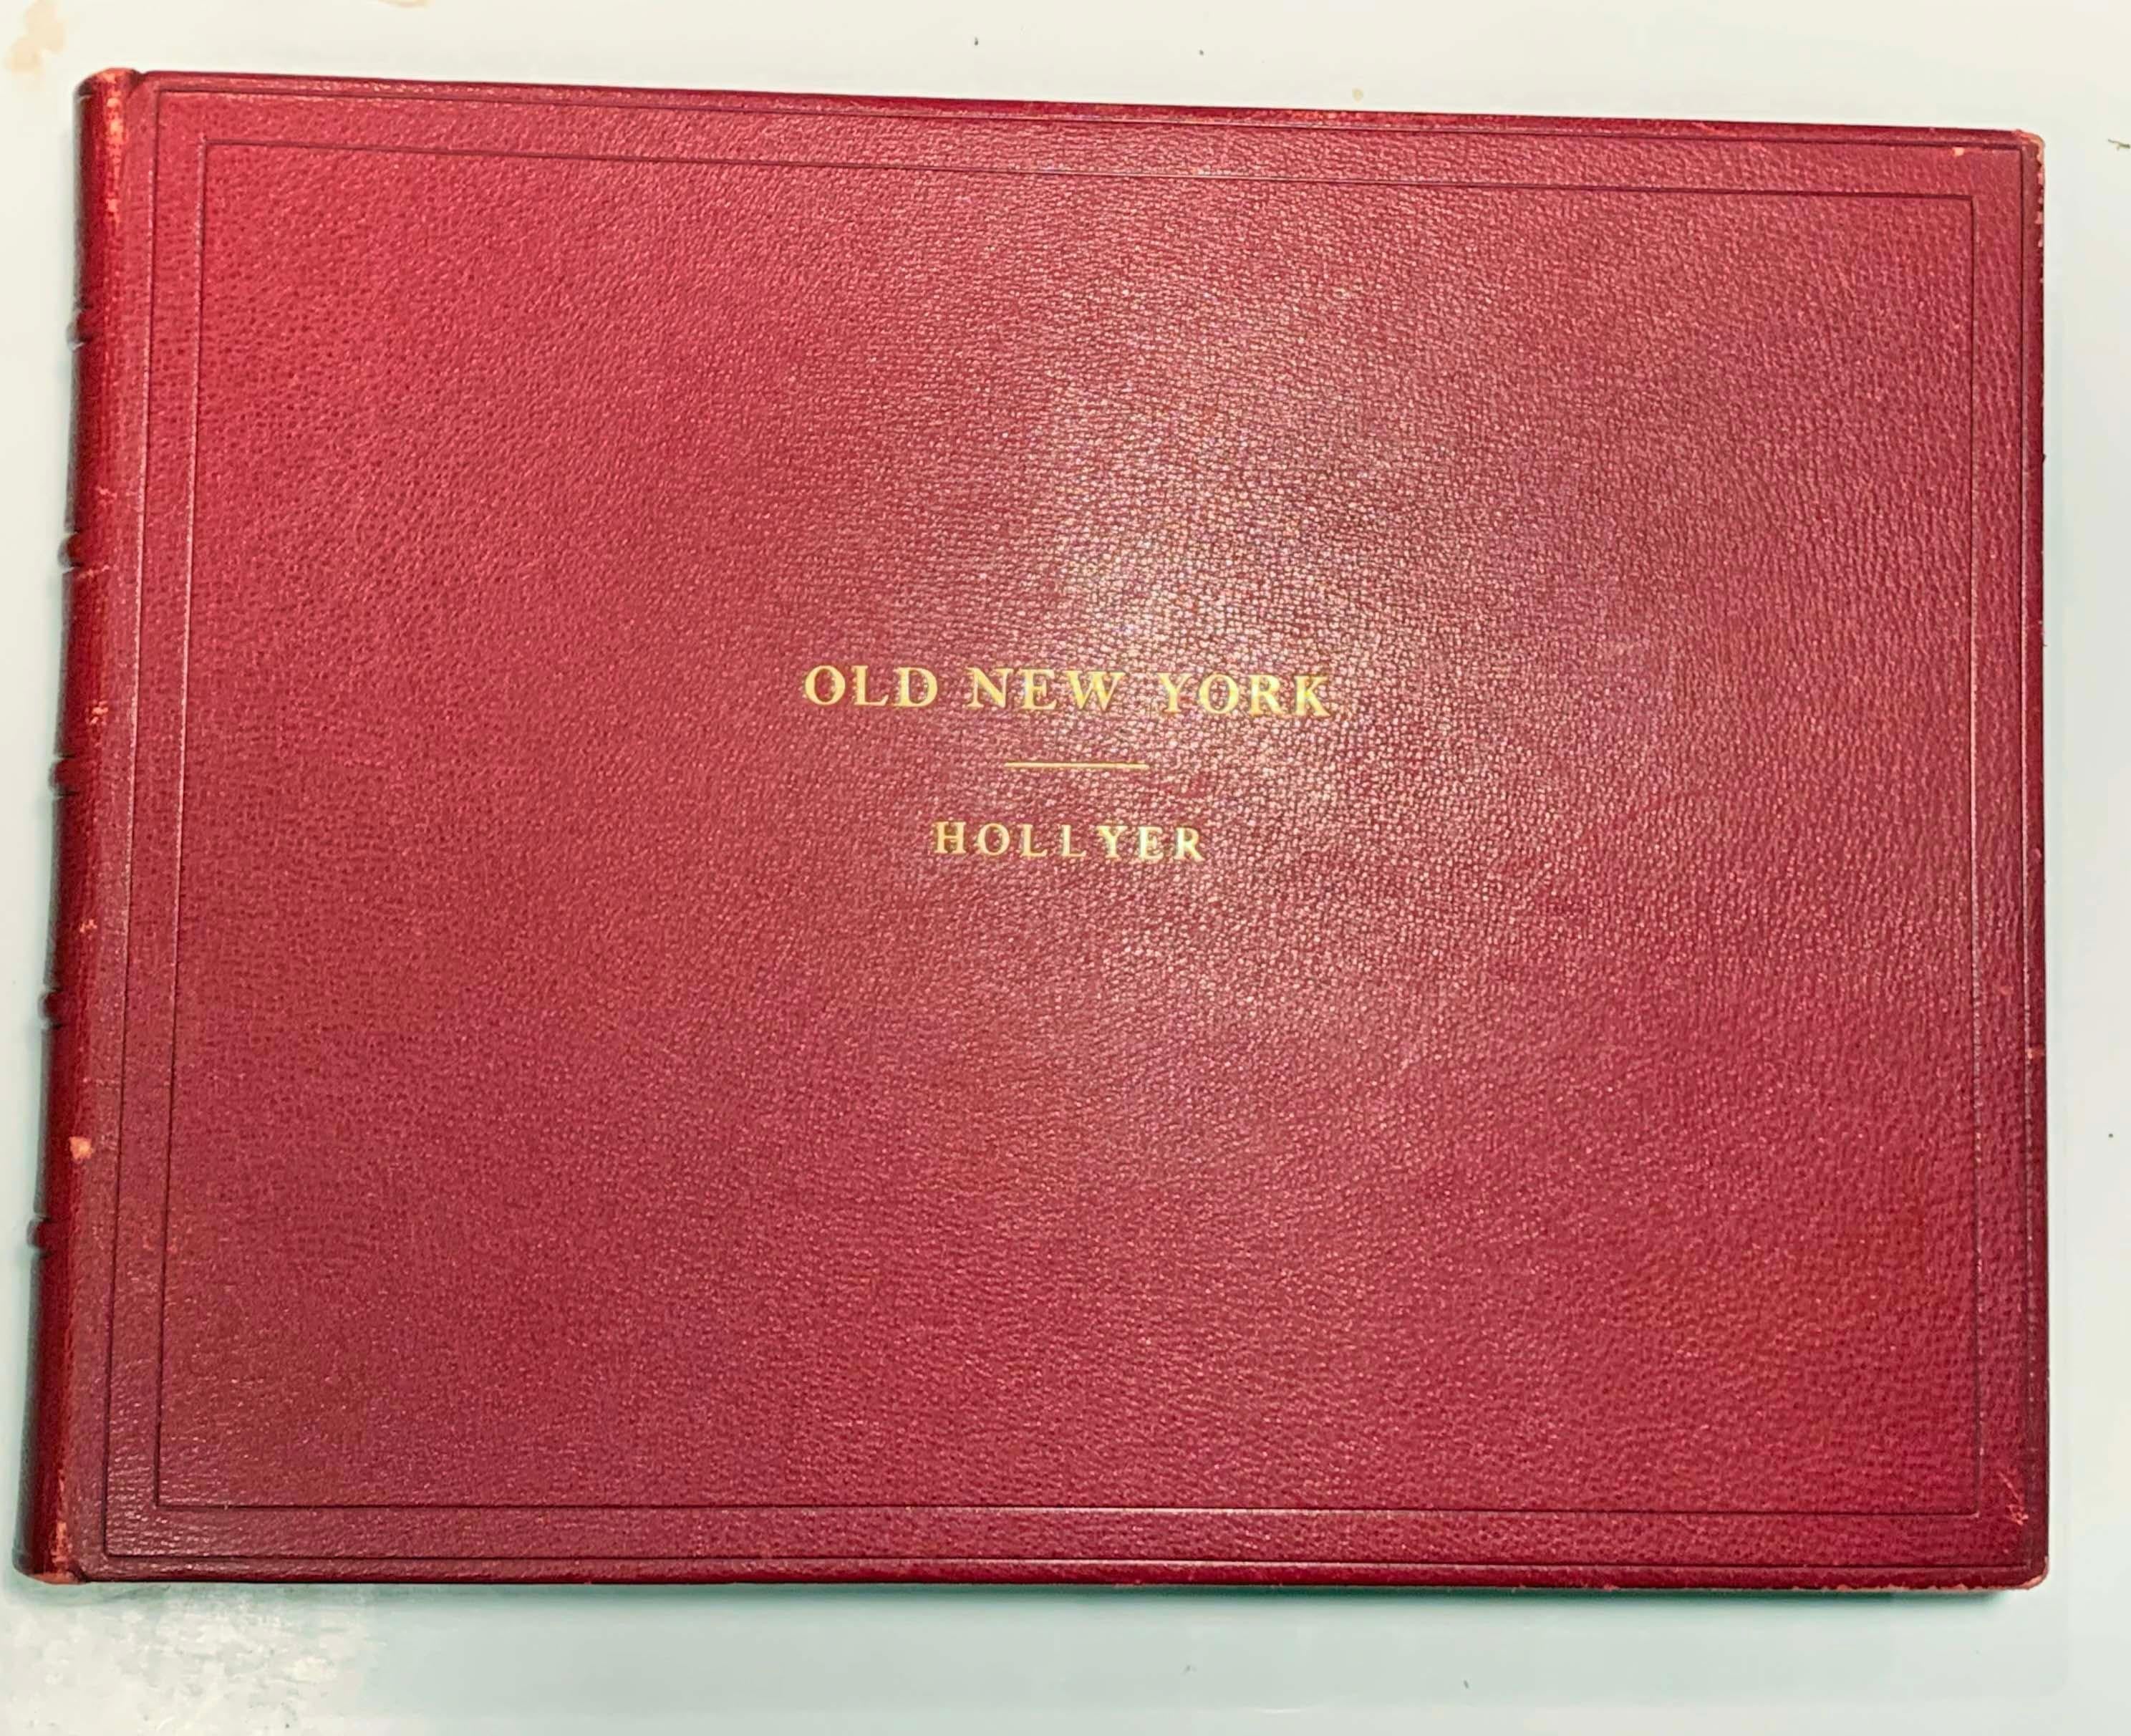 OLD NEW YORK - VIEWS BY S. HOLLYER - Print by Samuel Hollyer